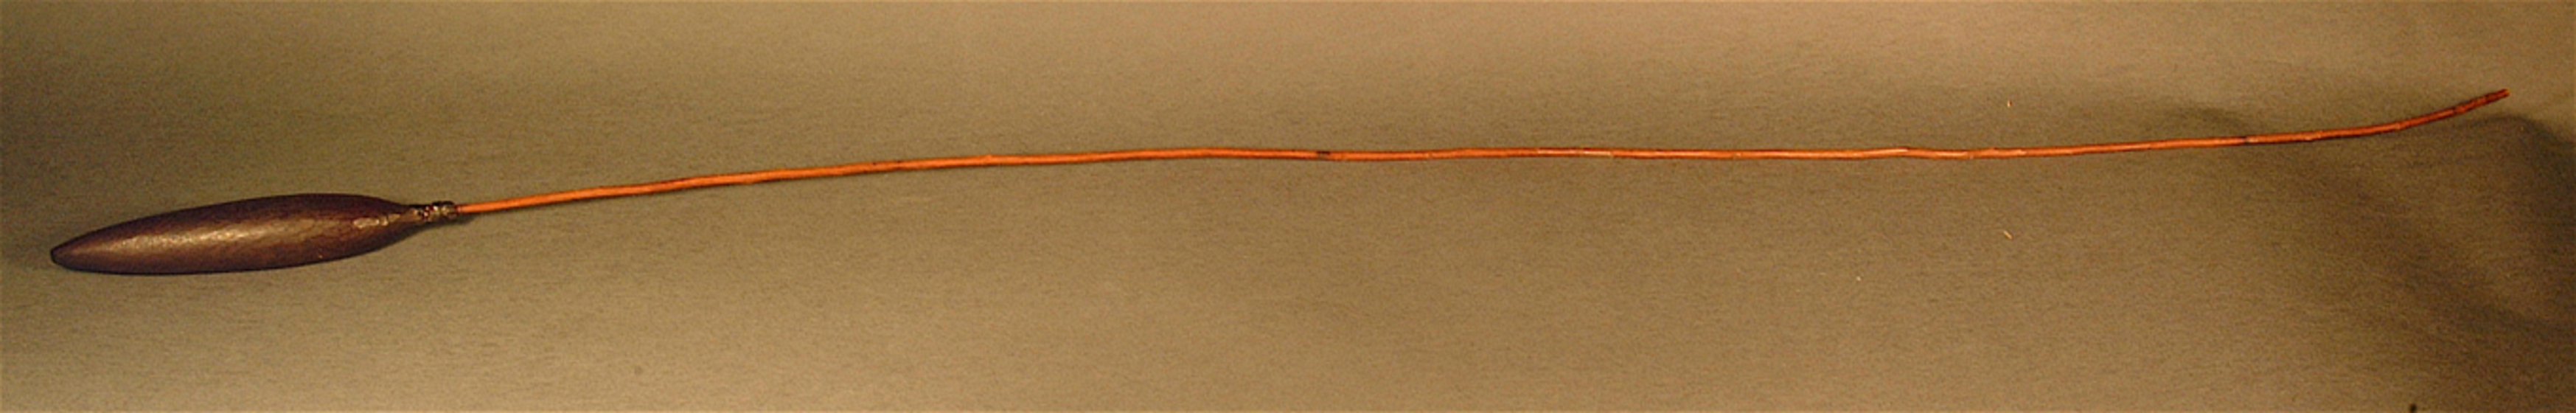 a long thin bird hunting stick pictured on a grey background